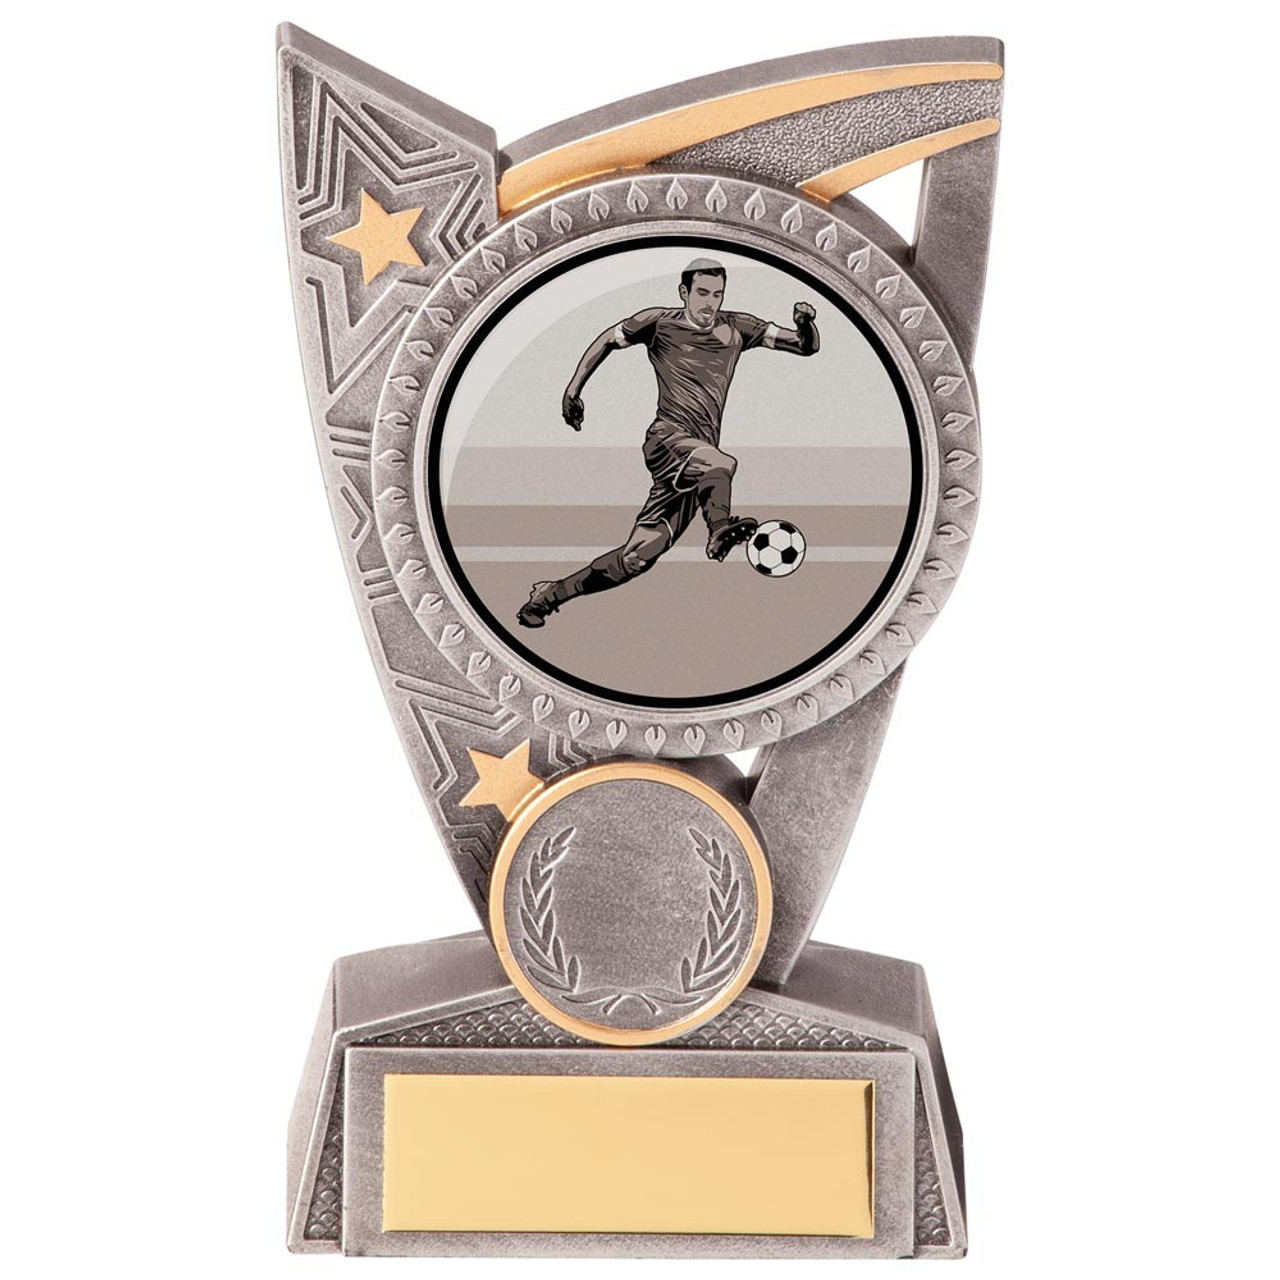 Football Club Silver & Gold Triumph Match Games Award With Free Engraving